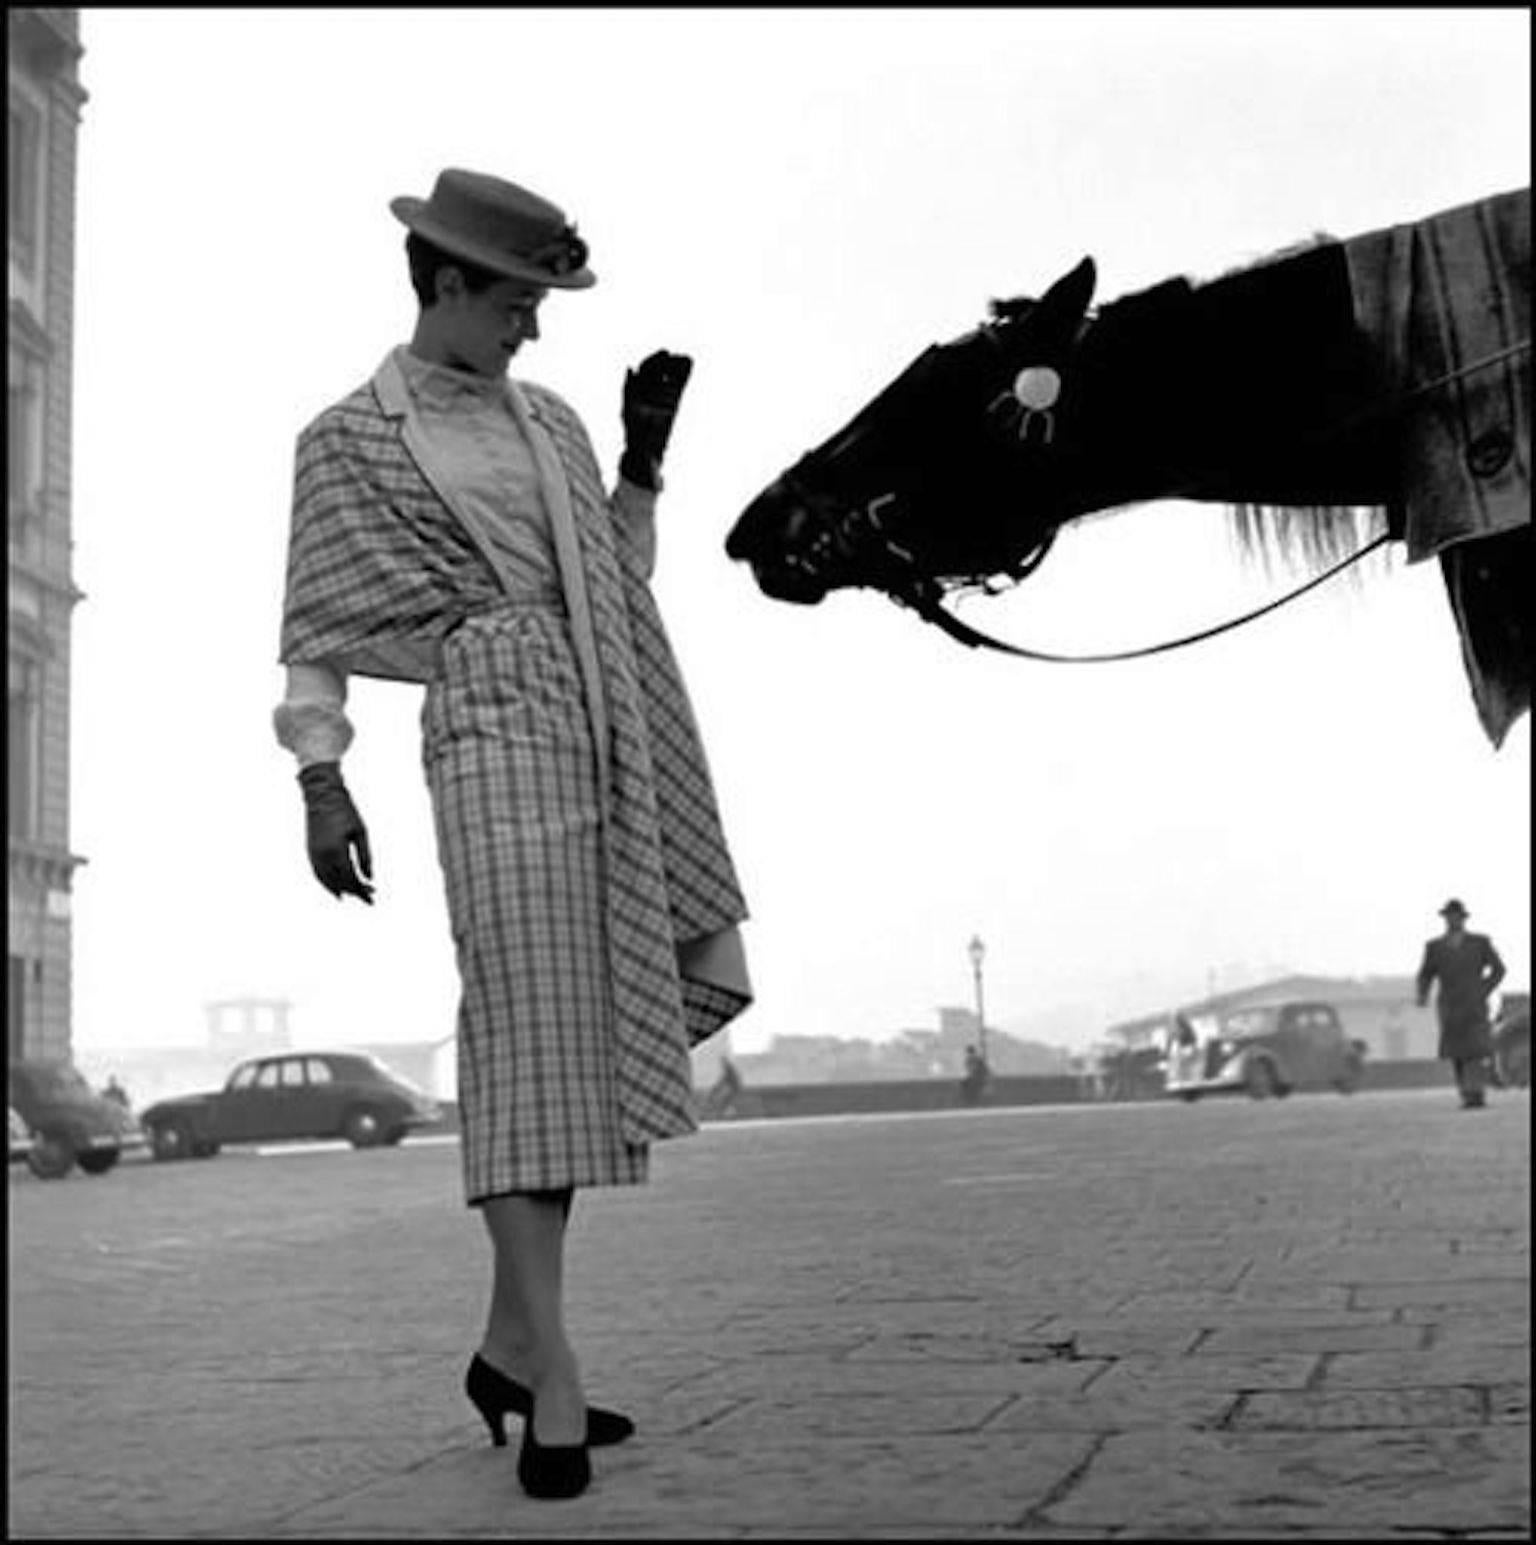 1951 Firenze, First Fashion Picture  - Photograph by Frank Horvat